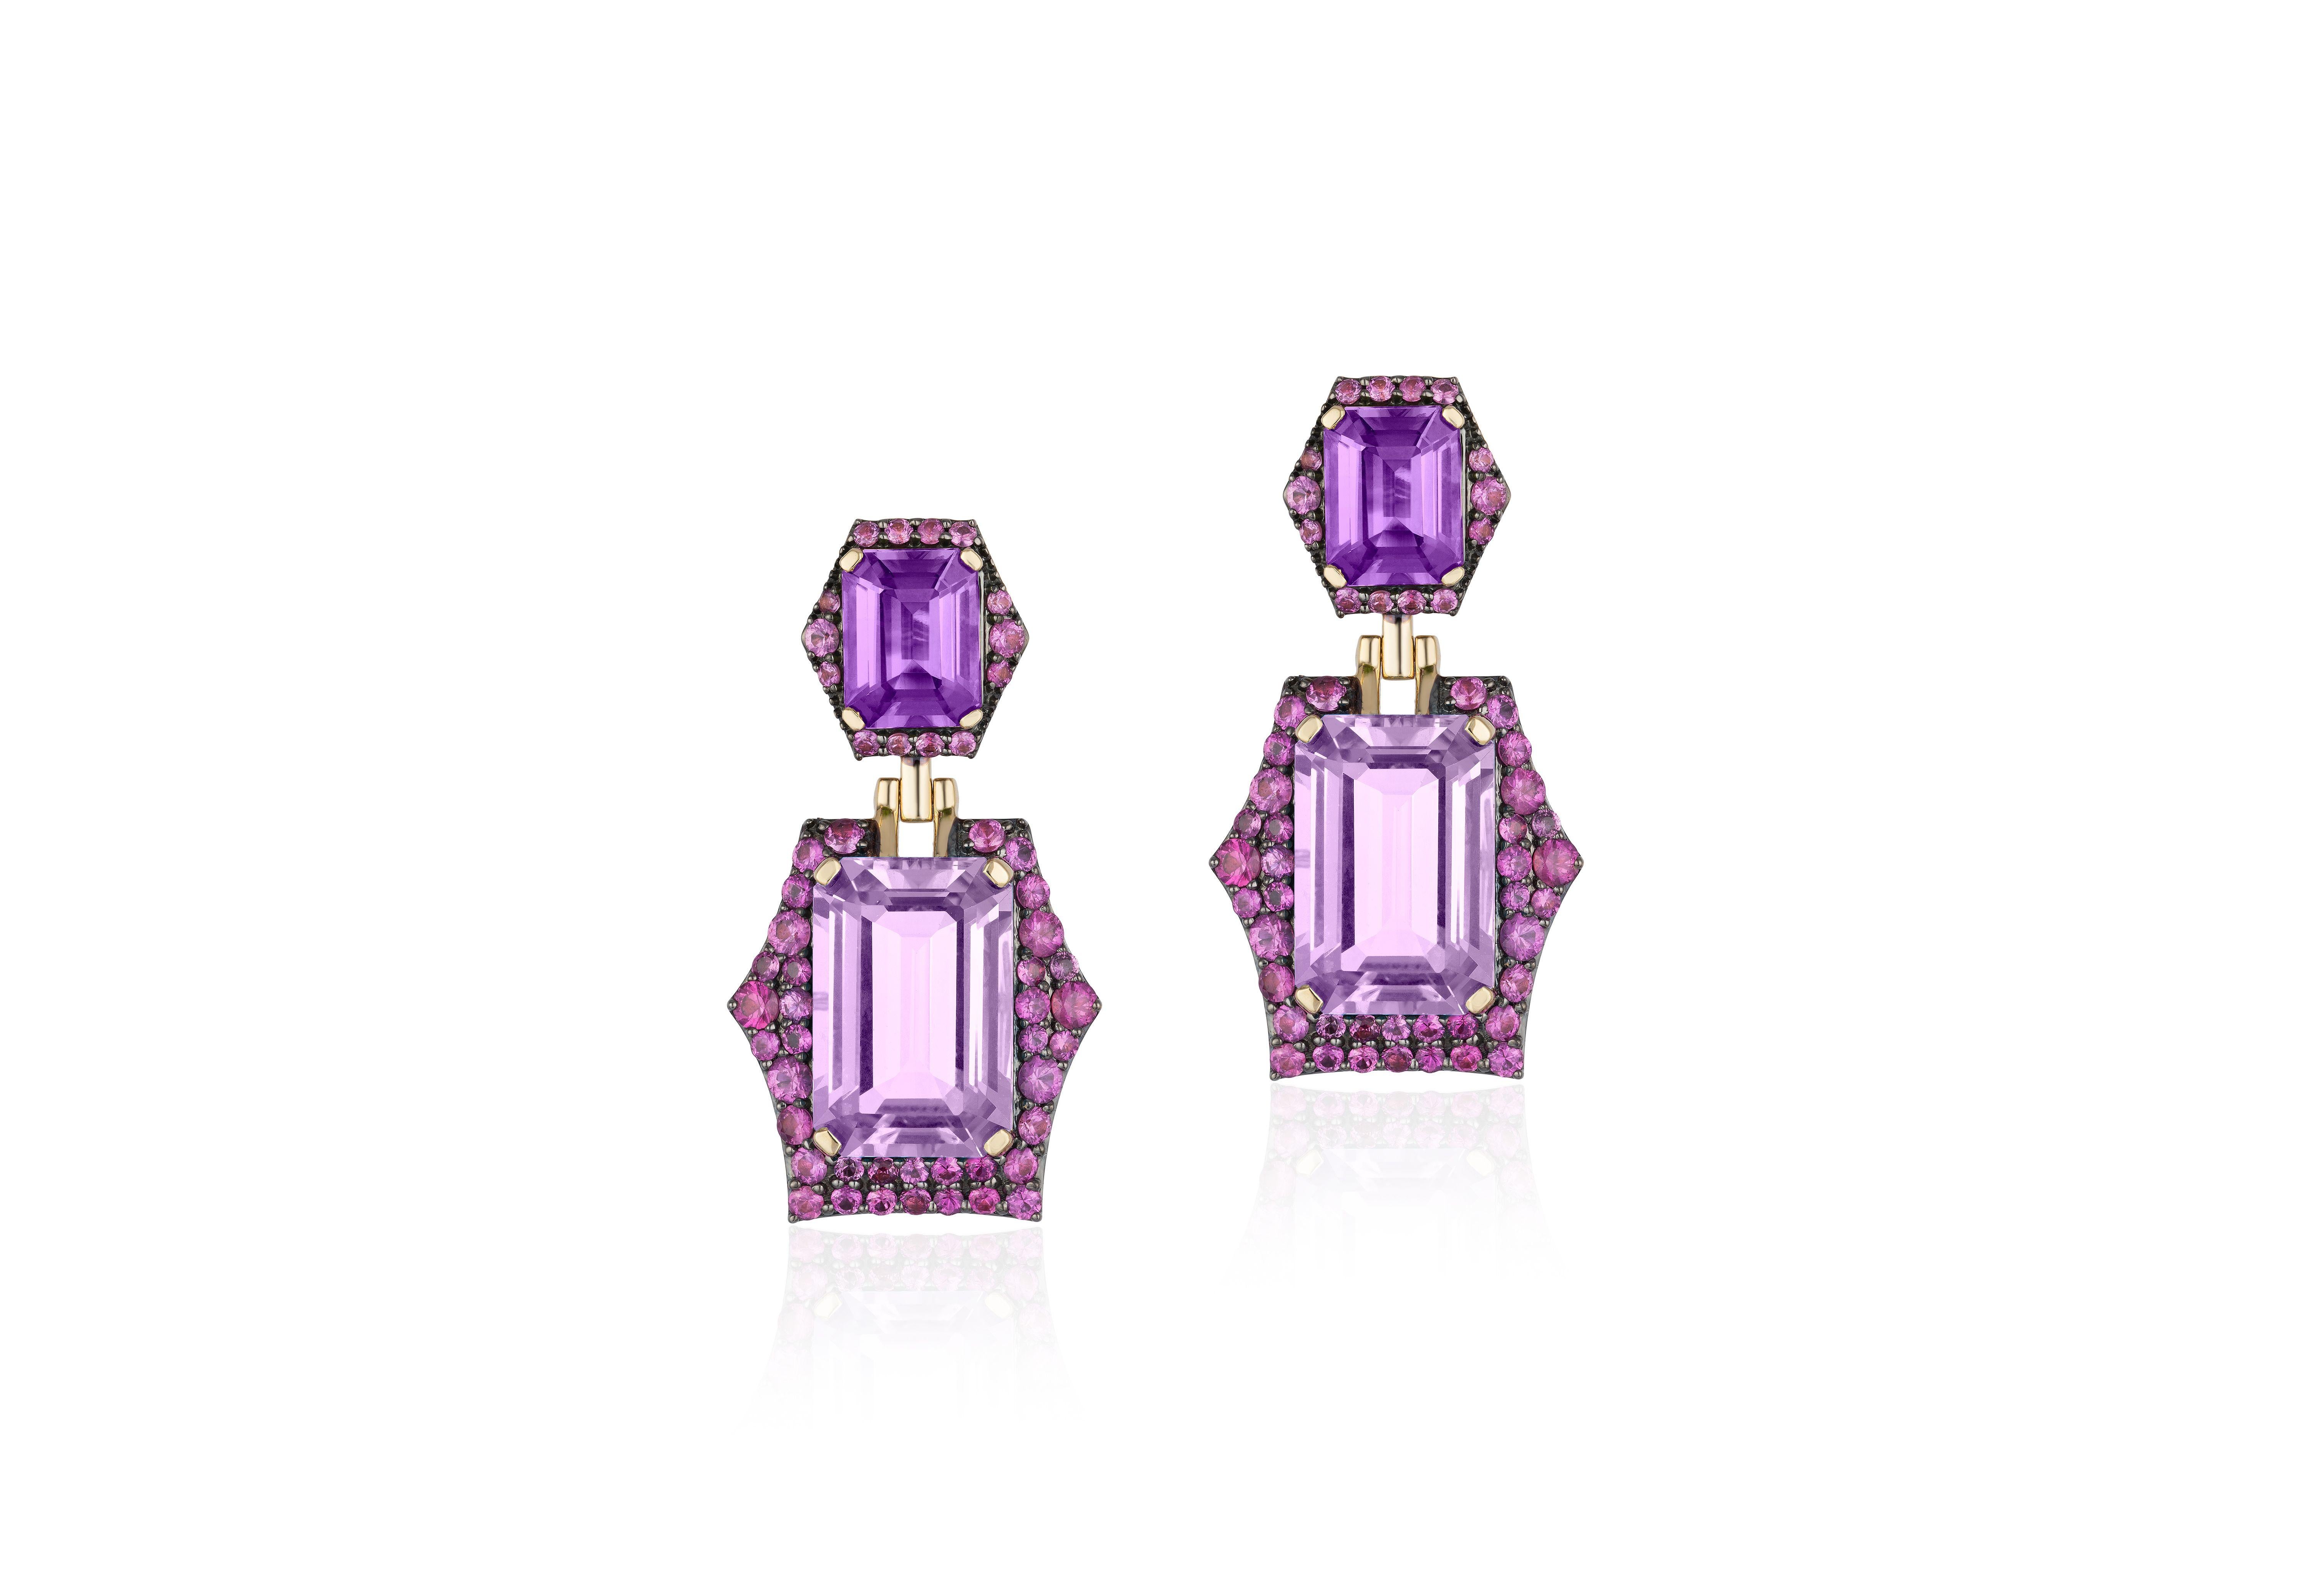 Lavender Amethyst, Amethyst and Pink Sapphire Earrings in 18K Yellow Gold, from 'Rain-Forest' Collection
Stone Size: 15 x 10 mm & 9 x 7 mm
Gemstone Approx. Wt: Amethyst- 14.09 Carats 
                                          Pink Sapphire- 3.13